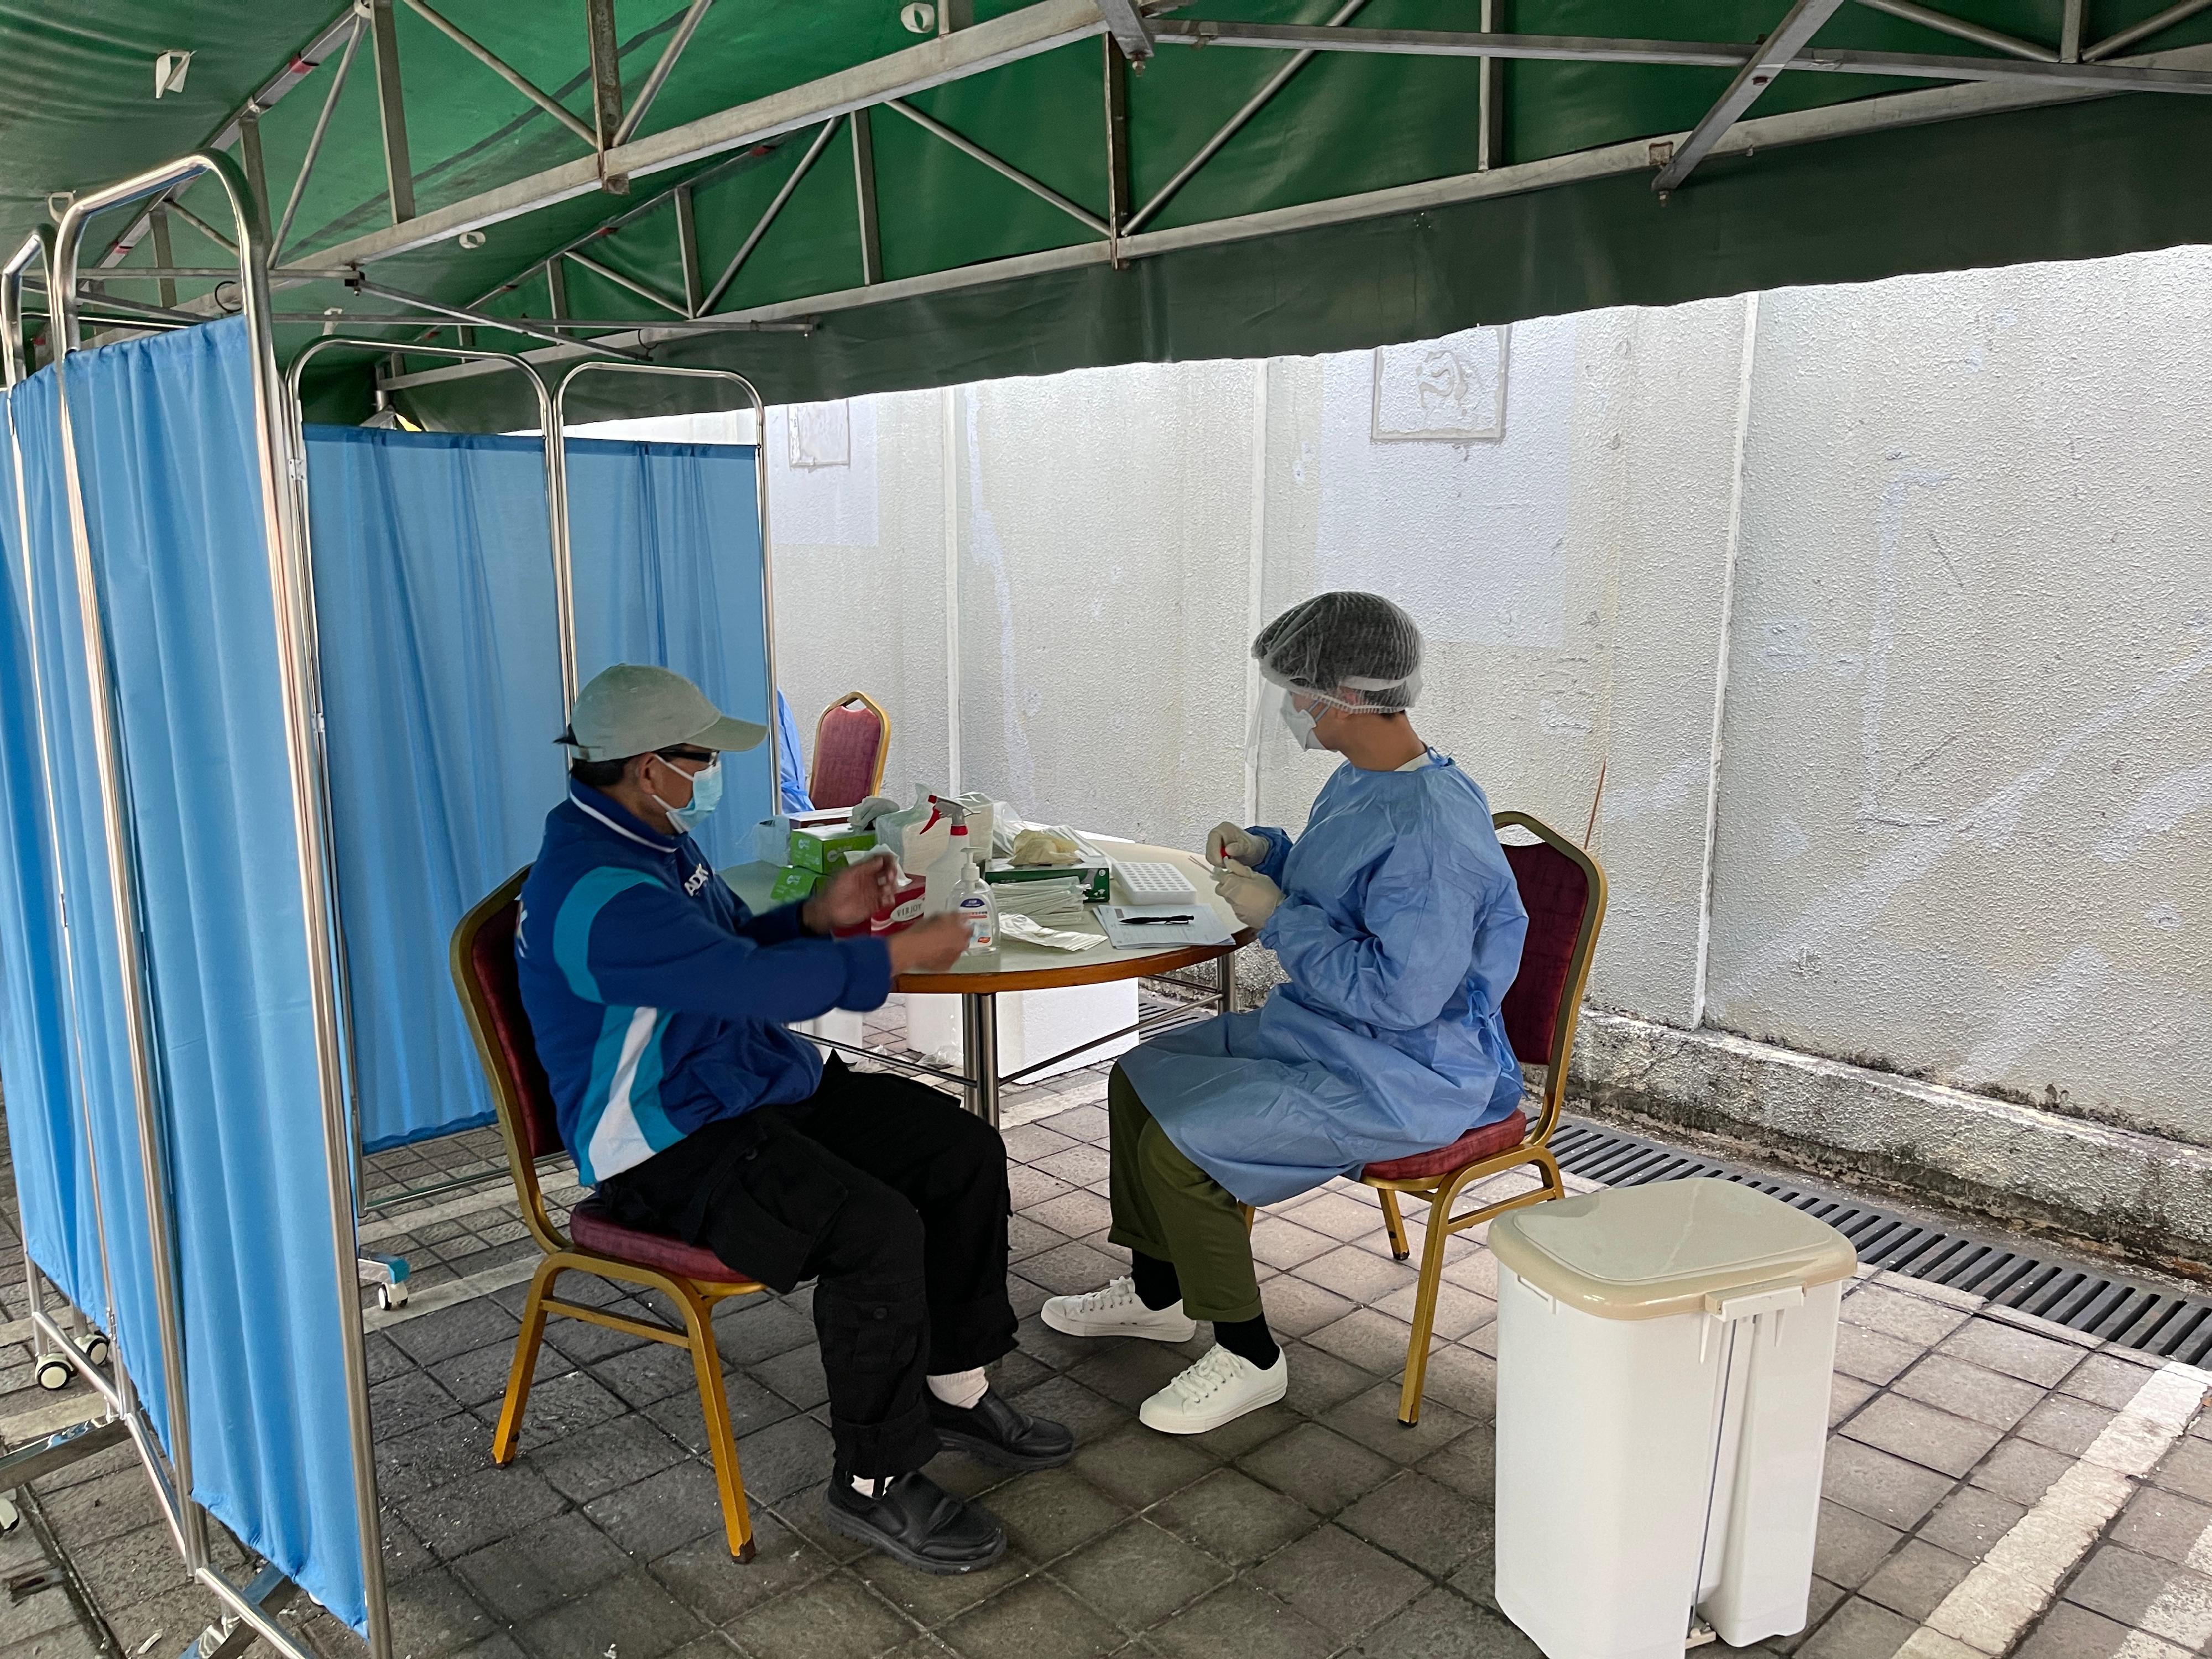 The Food and Environmental Hygiene Department has arranged polymerase chain reaction-based nucleic acid tests for COVID-19 for all practitioners of Sheung Shui Slaughterhouse and Tsuen Wan Slaughterhouse this weekend, using specimens taken through combined nasal and throat swabs (specified tests), for early detection of infected persons and reduction of the risks of virus transmission.
